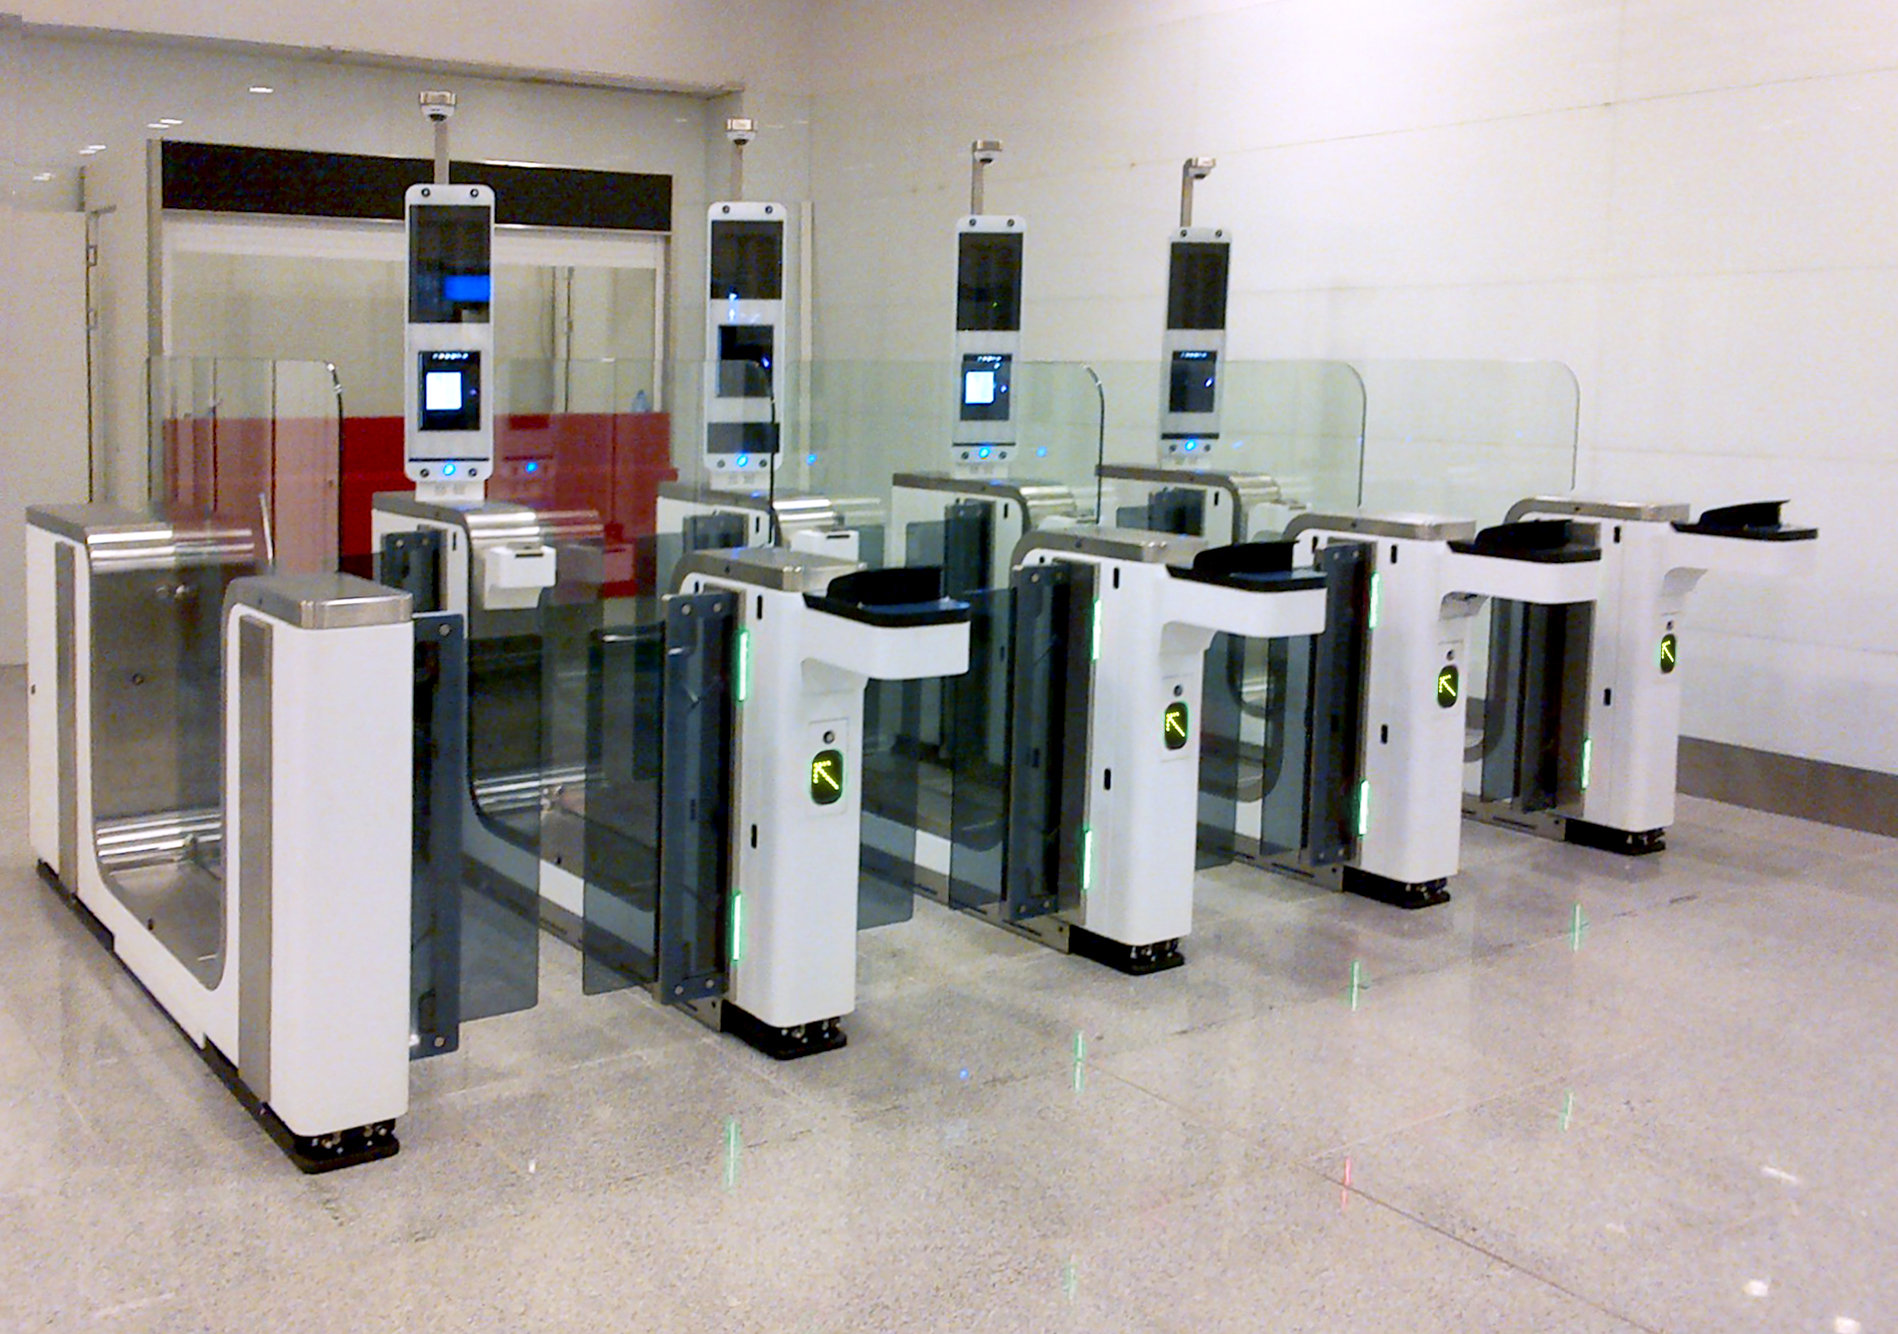 Automated Border Control eGates were deployed at Varna and Burgas International Airports